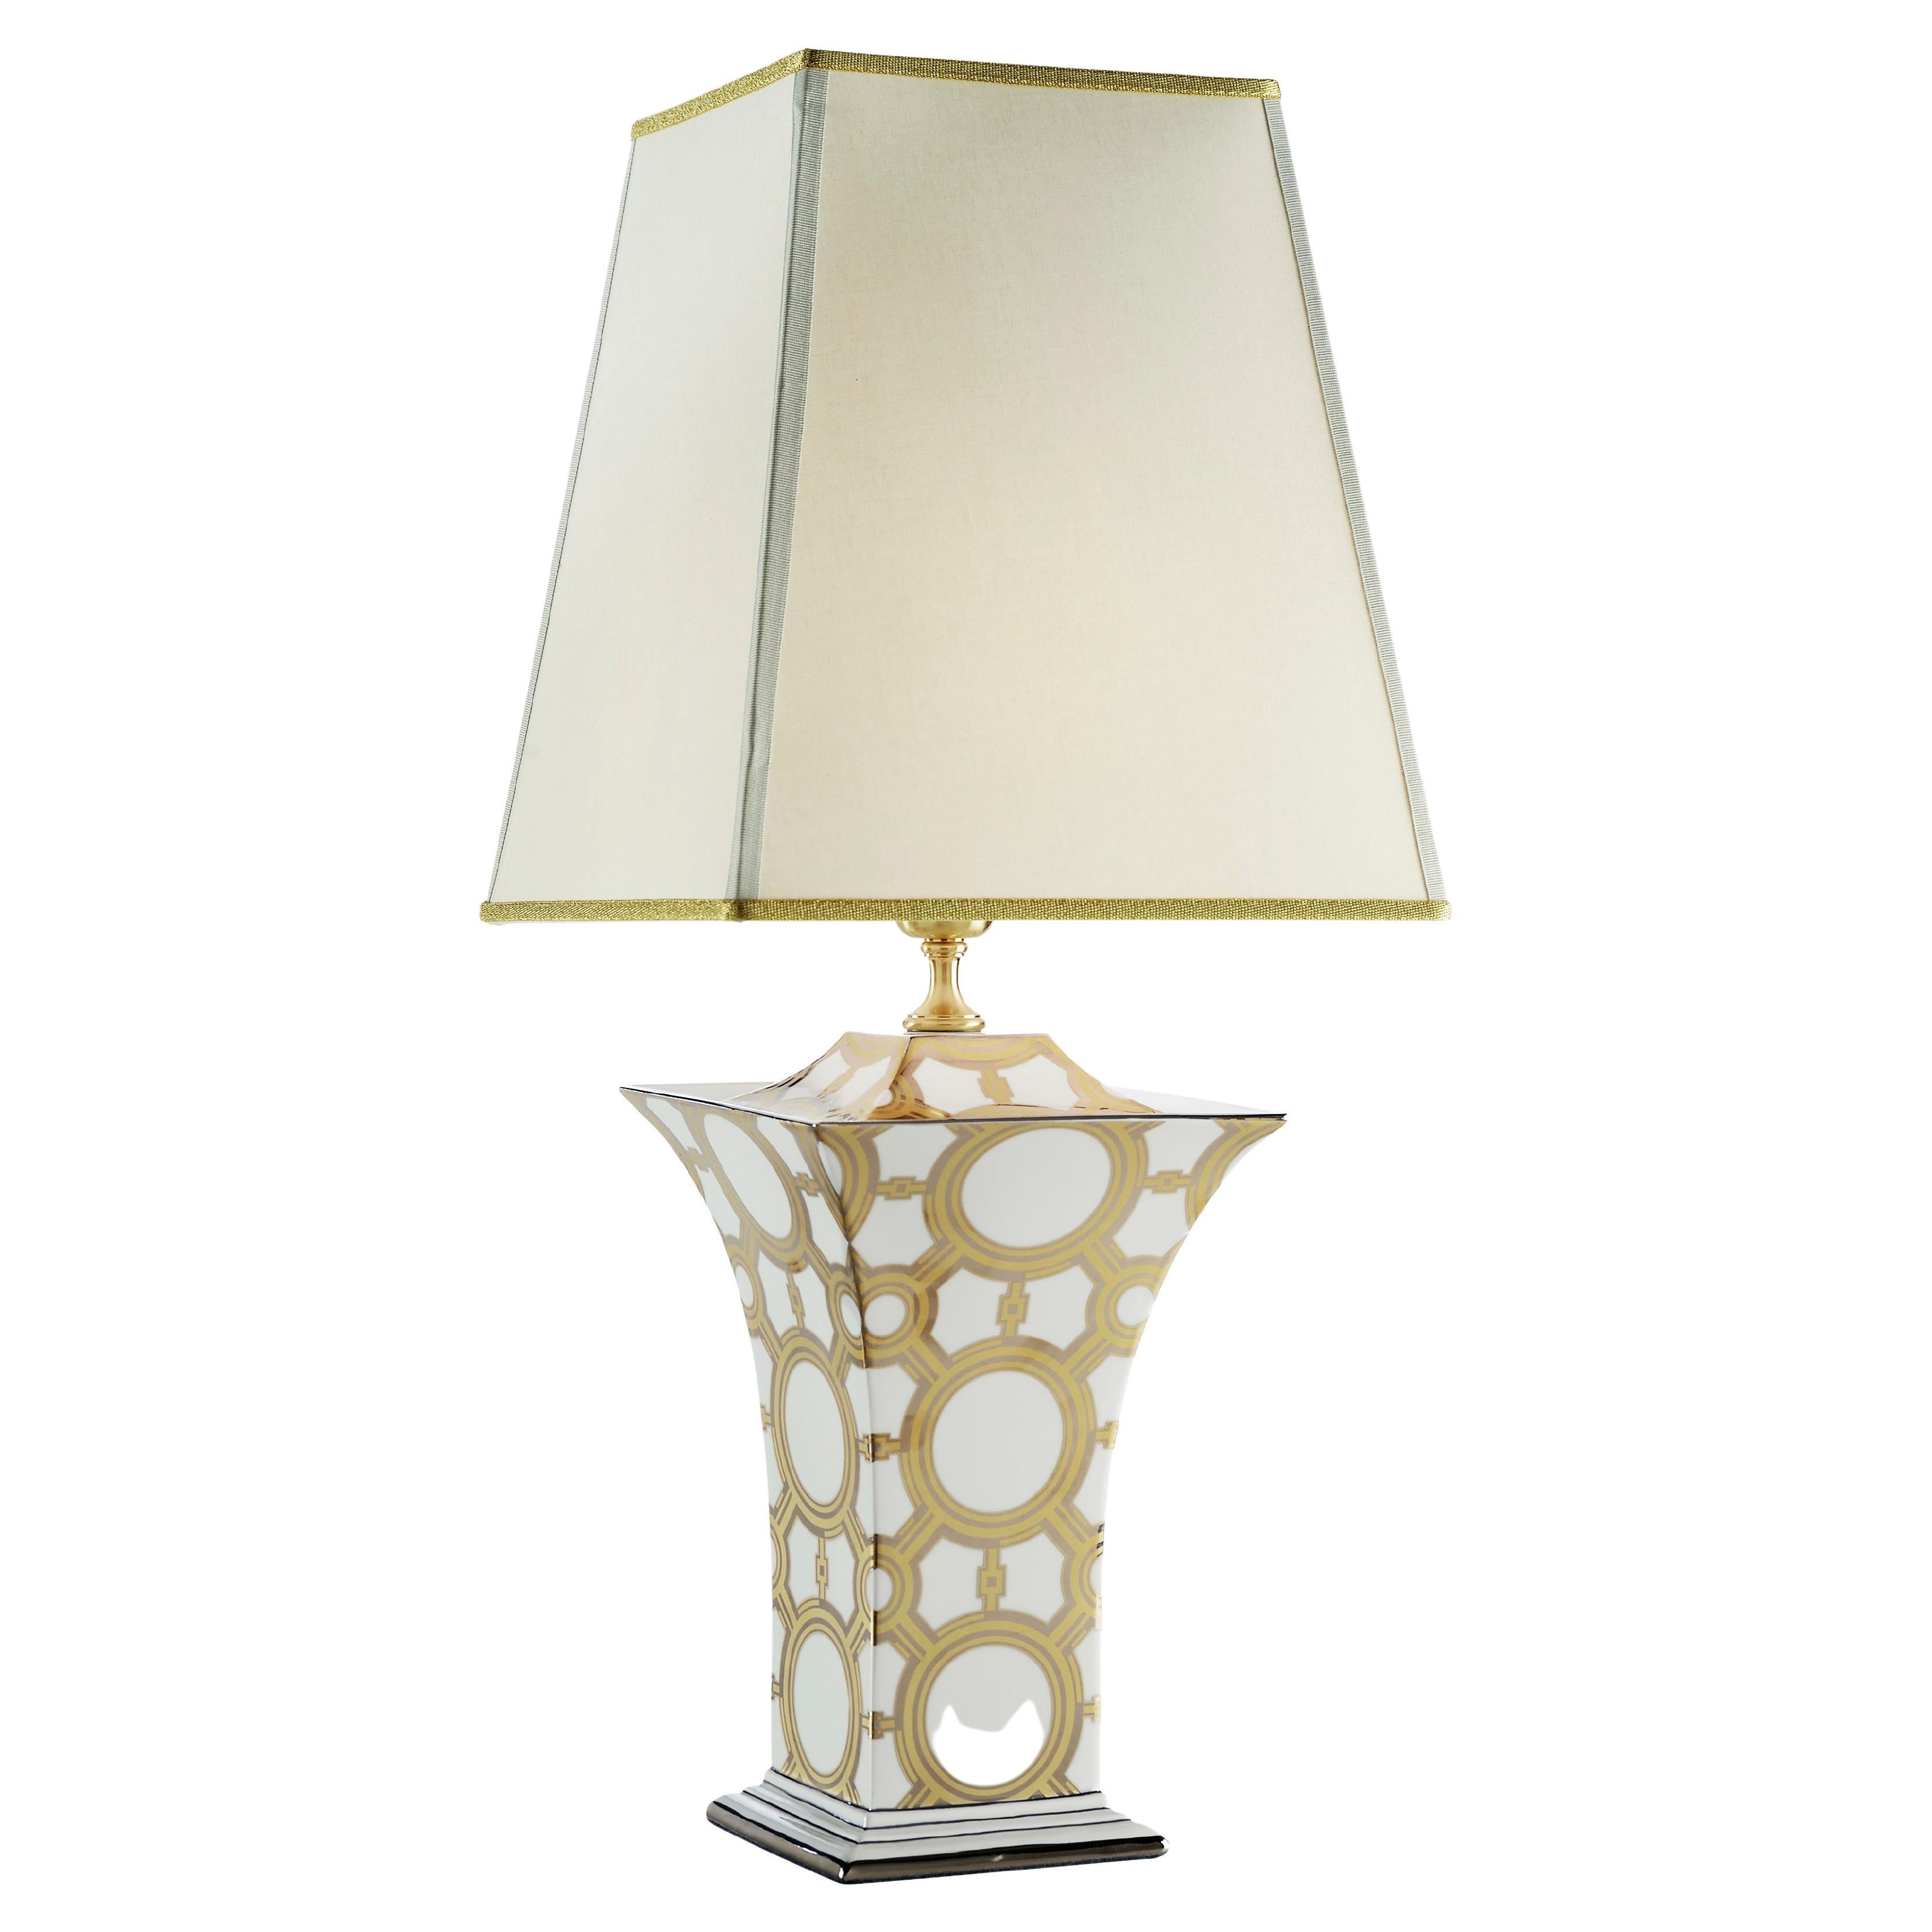 Palazzo Vecchio Collection - Table Lamp with Gold and Platinum Decorations  For Sale